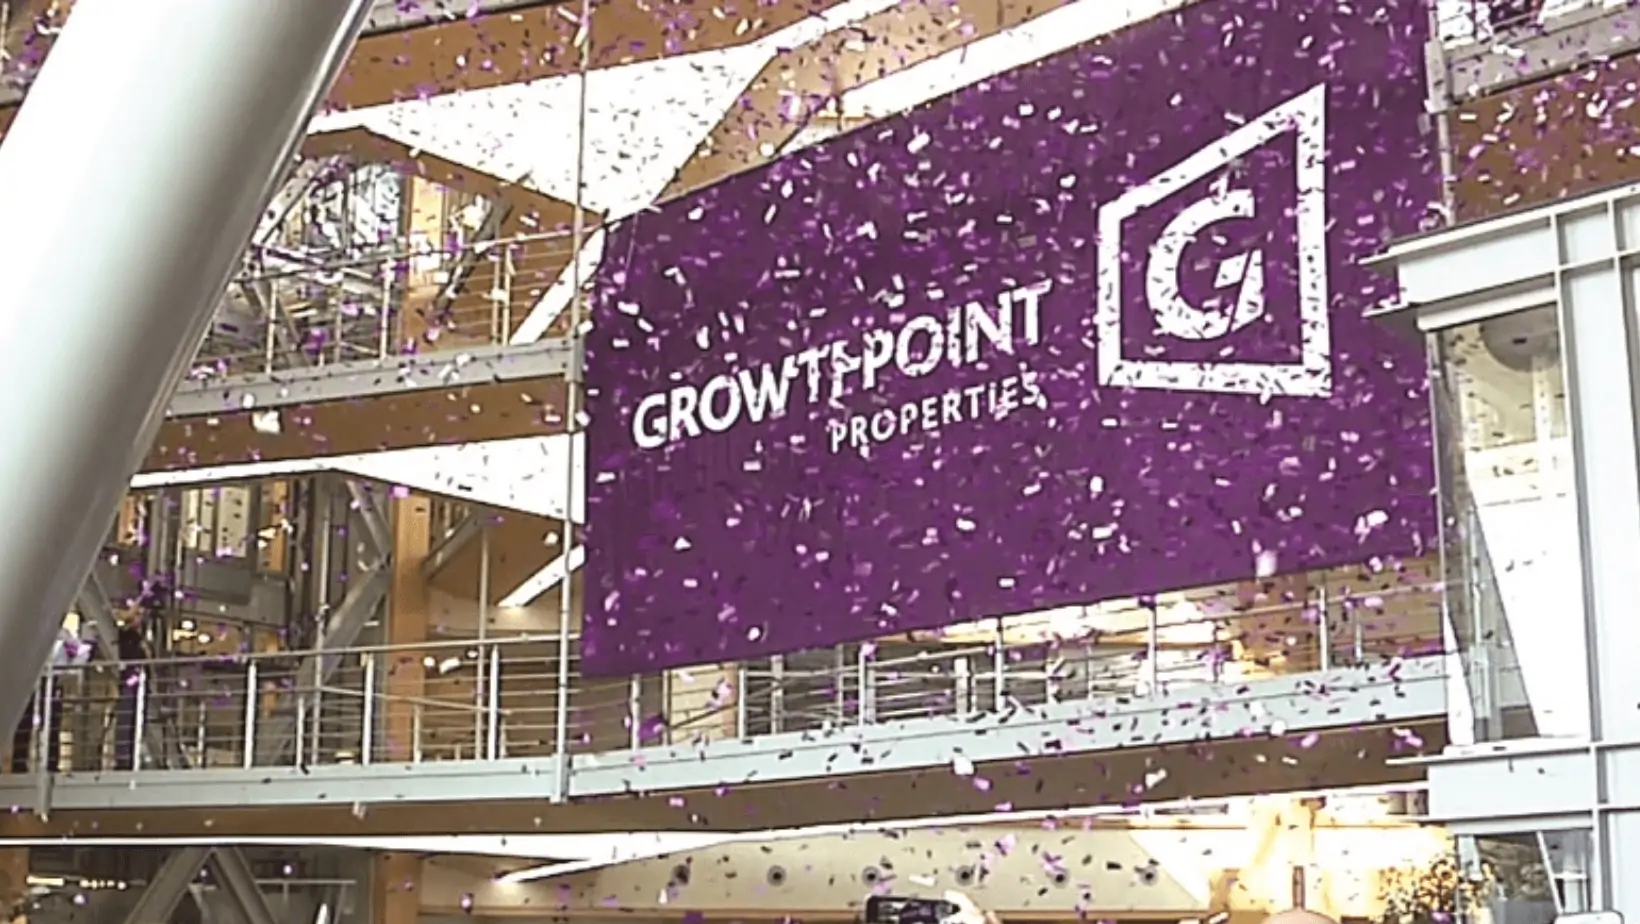 Growthpoint Shakeup: HR Chief Exits